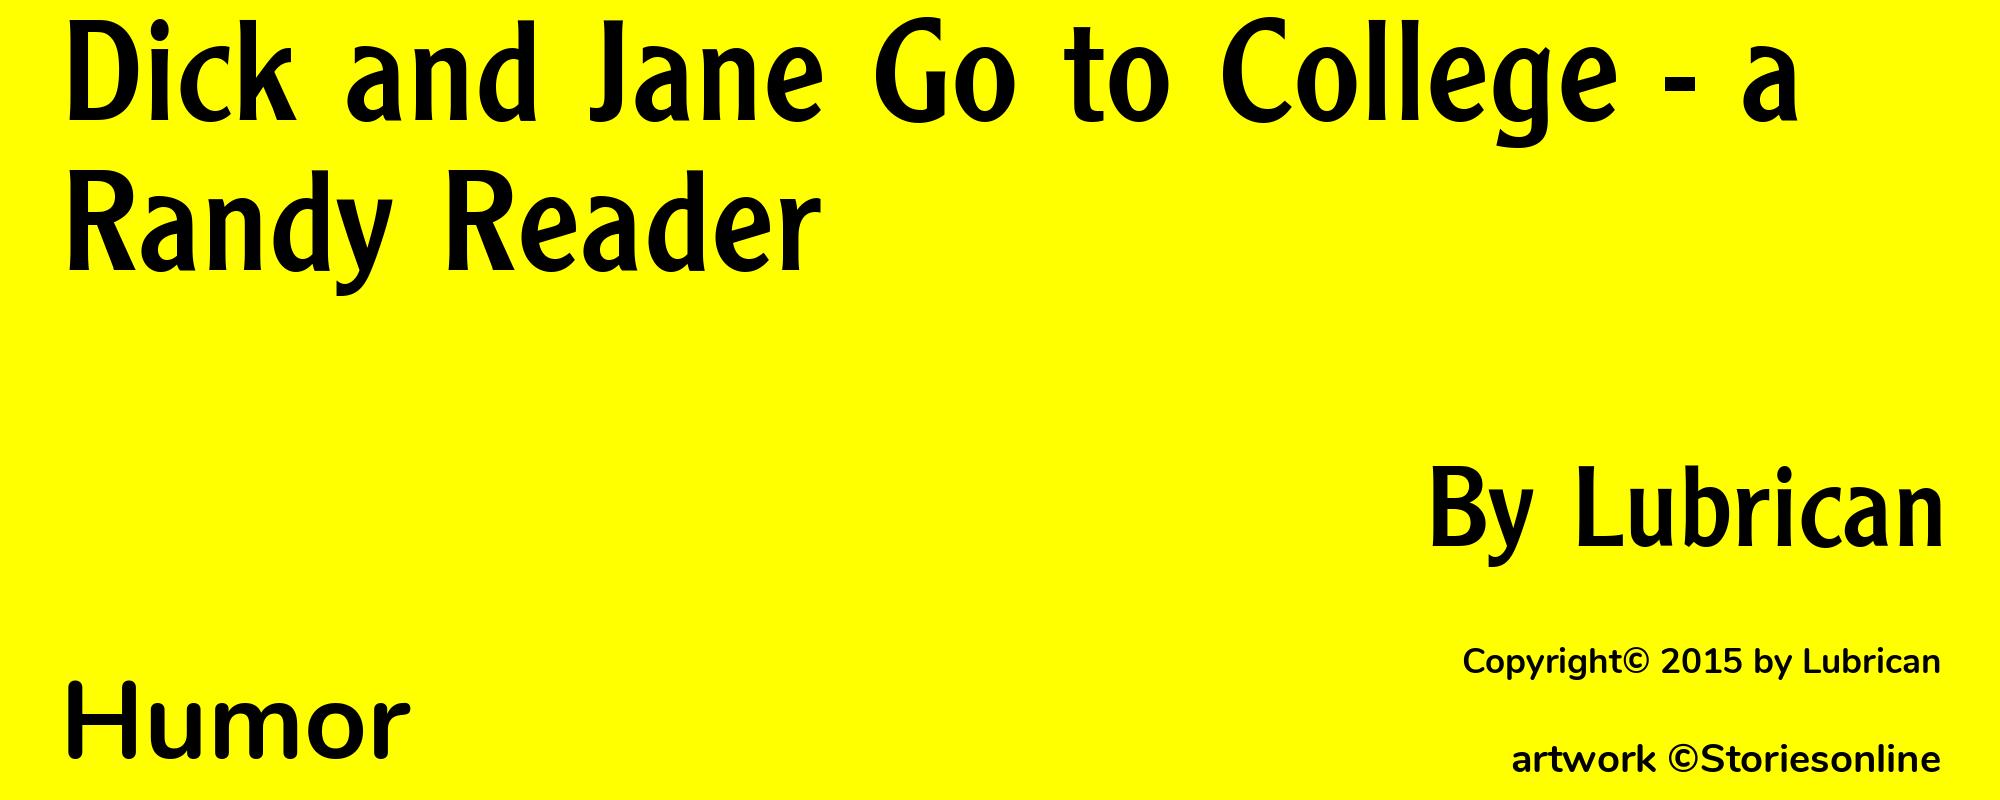 Dick and Jane Go to College - a Randy Reader - Cover